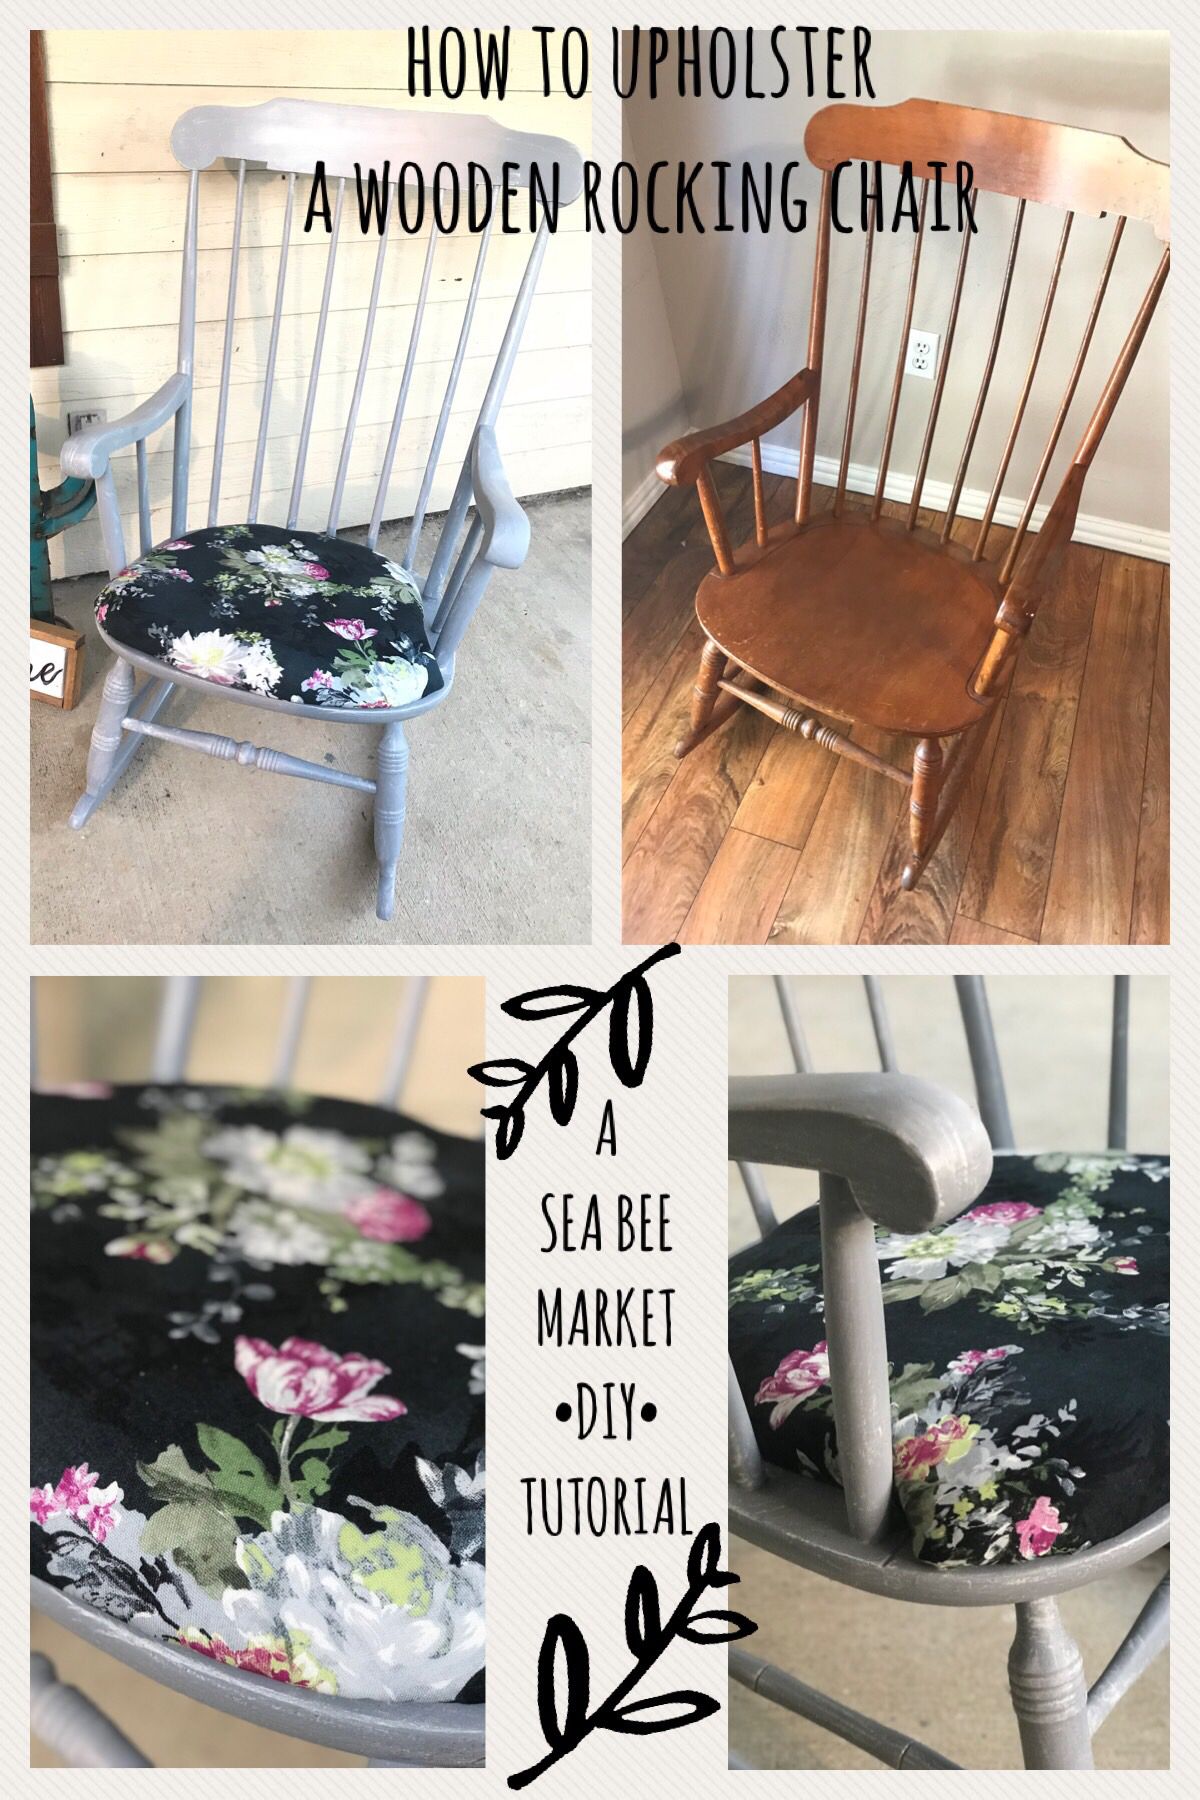 Upholstering a Wooden Rocking Chair